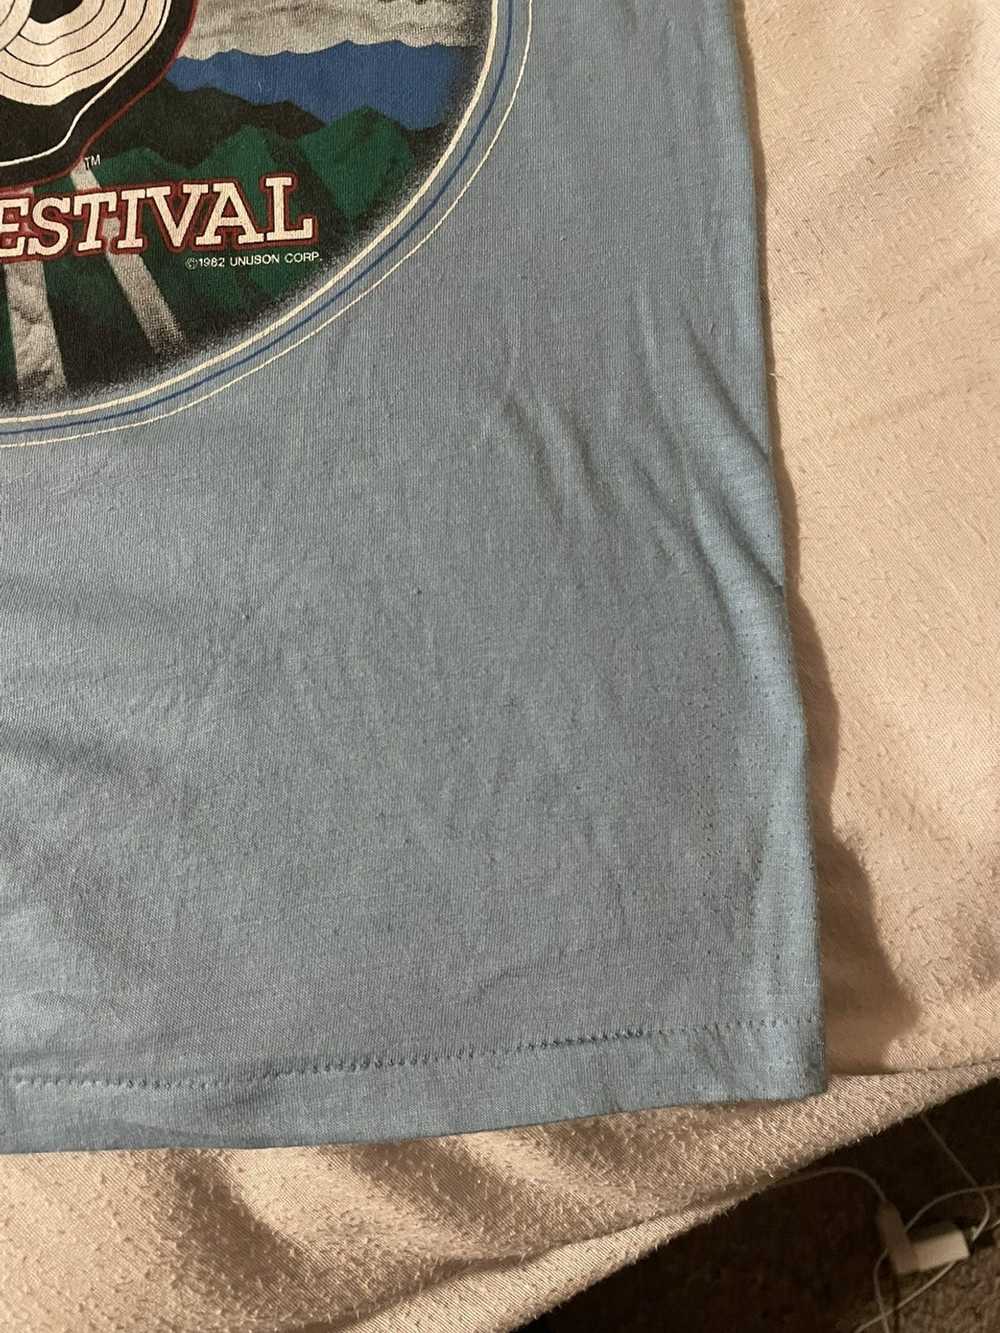 Band Tees 1982 US Festival Rock Concert Muscle T … - image 11